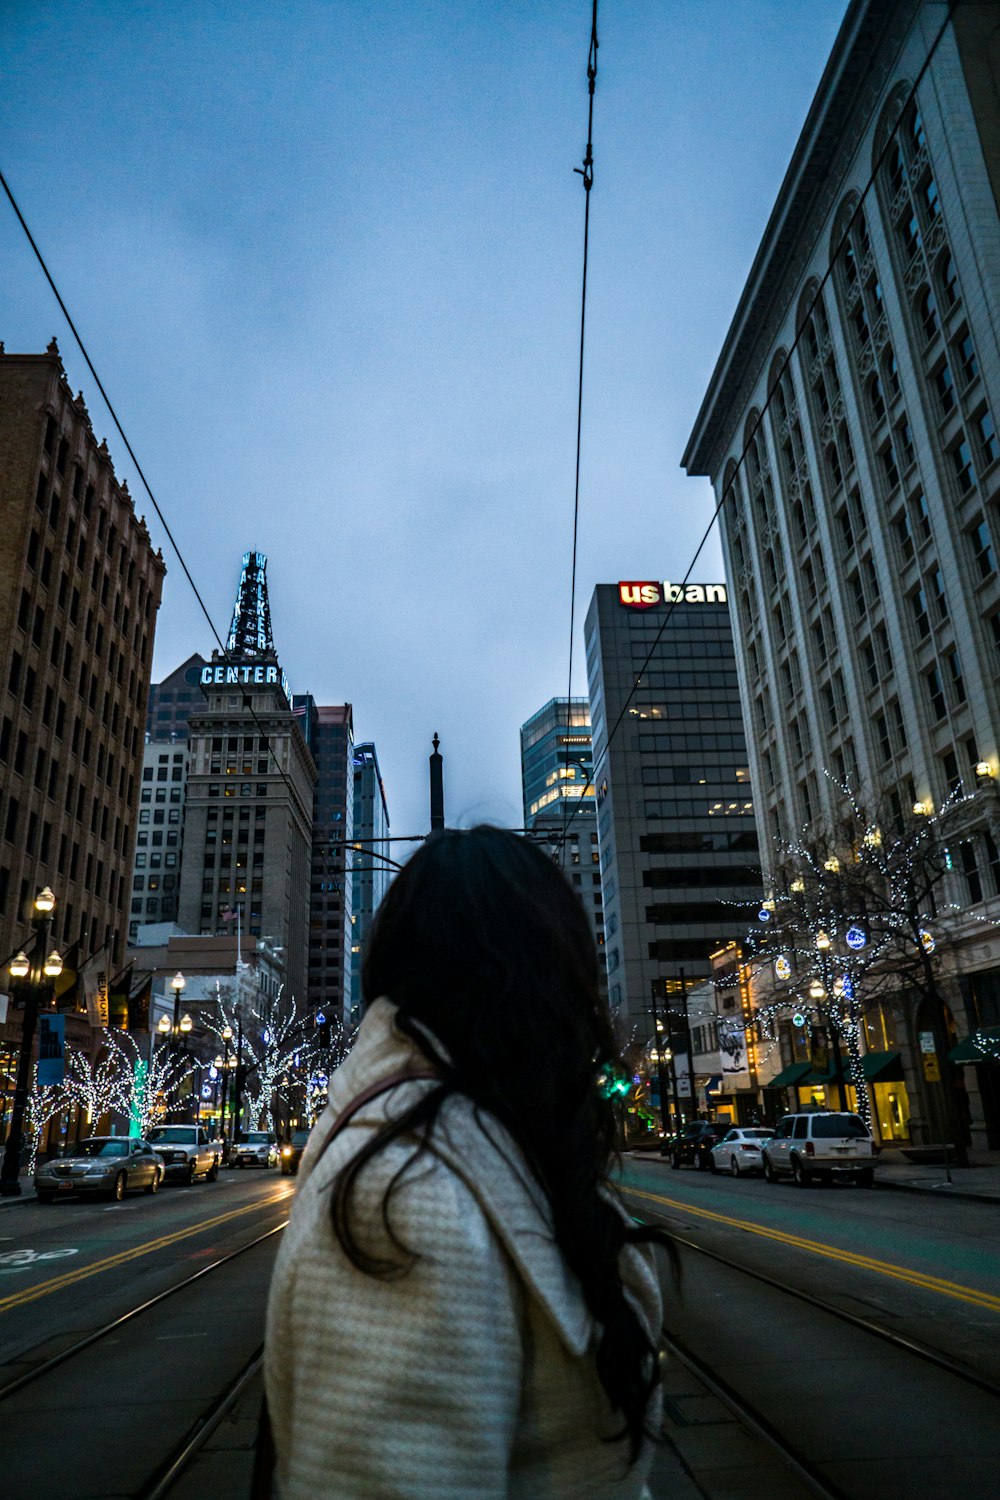 a woman walking down a street next to tall buildings